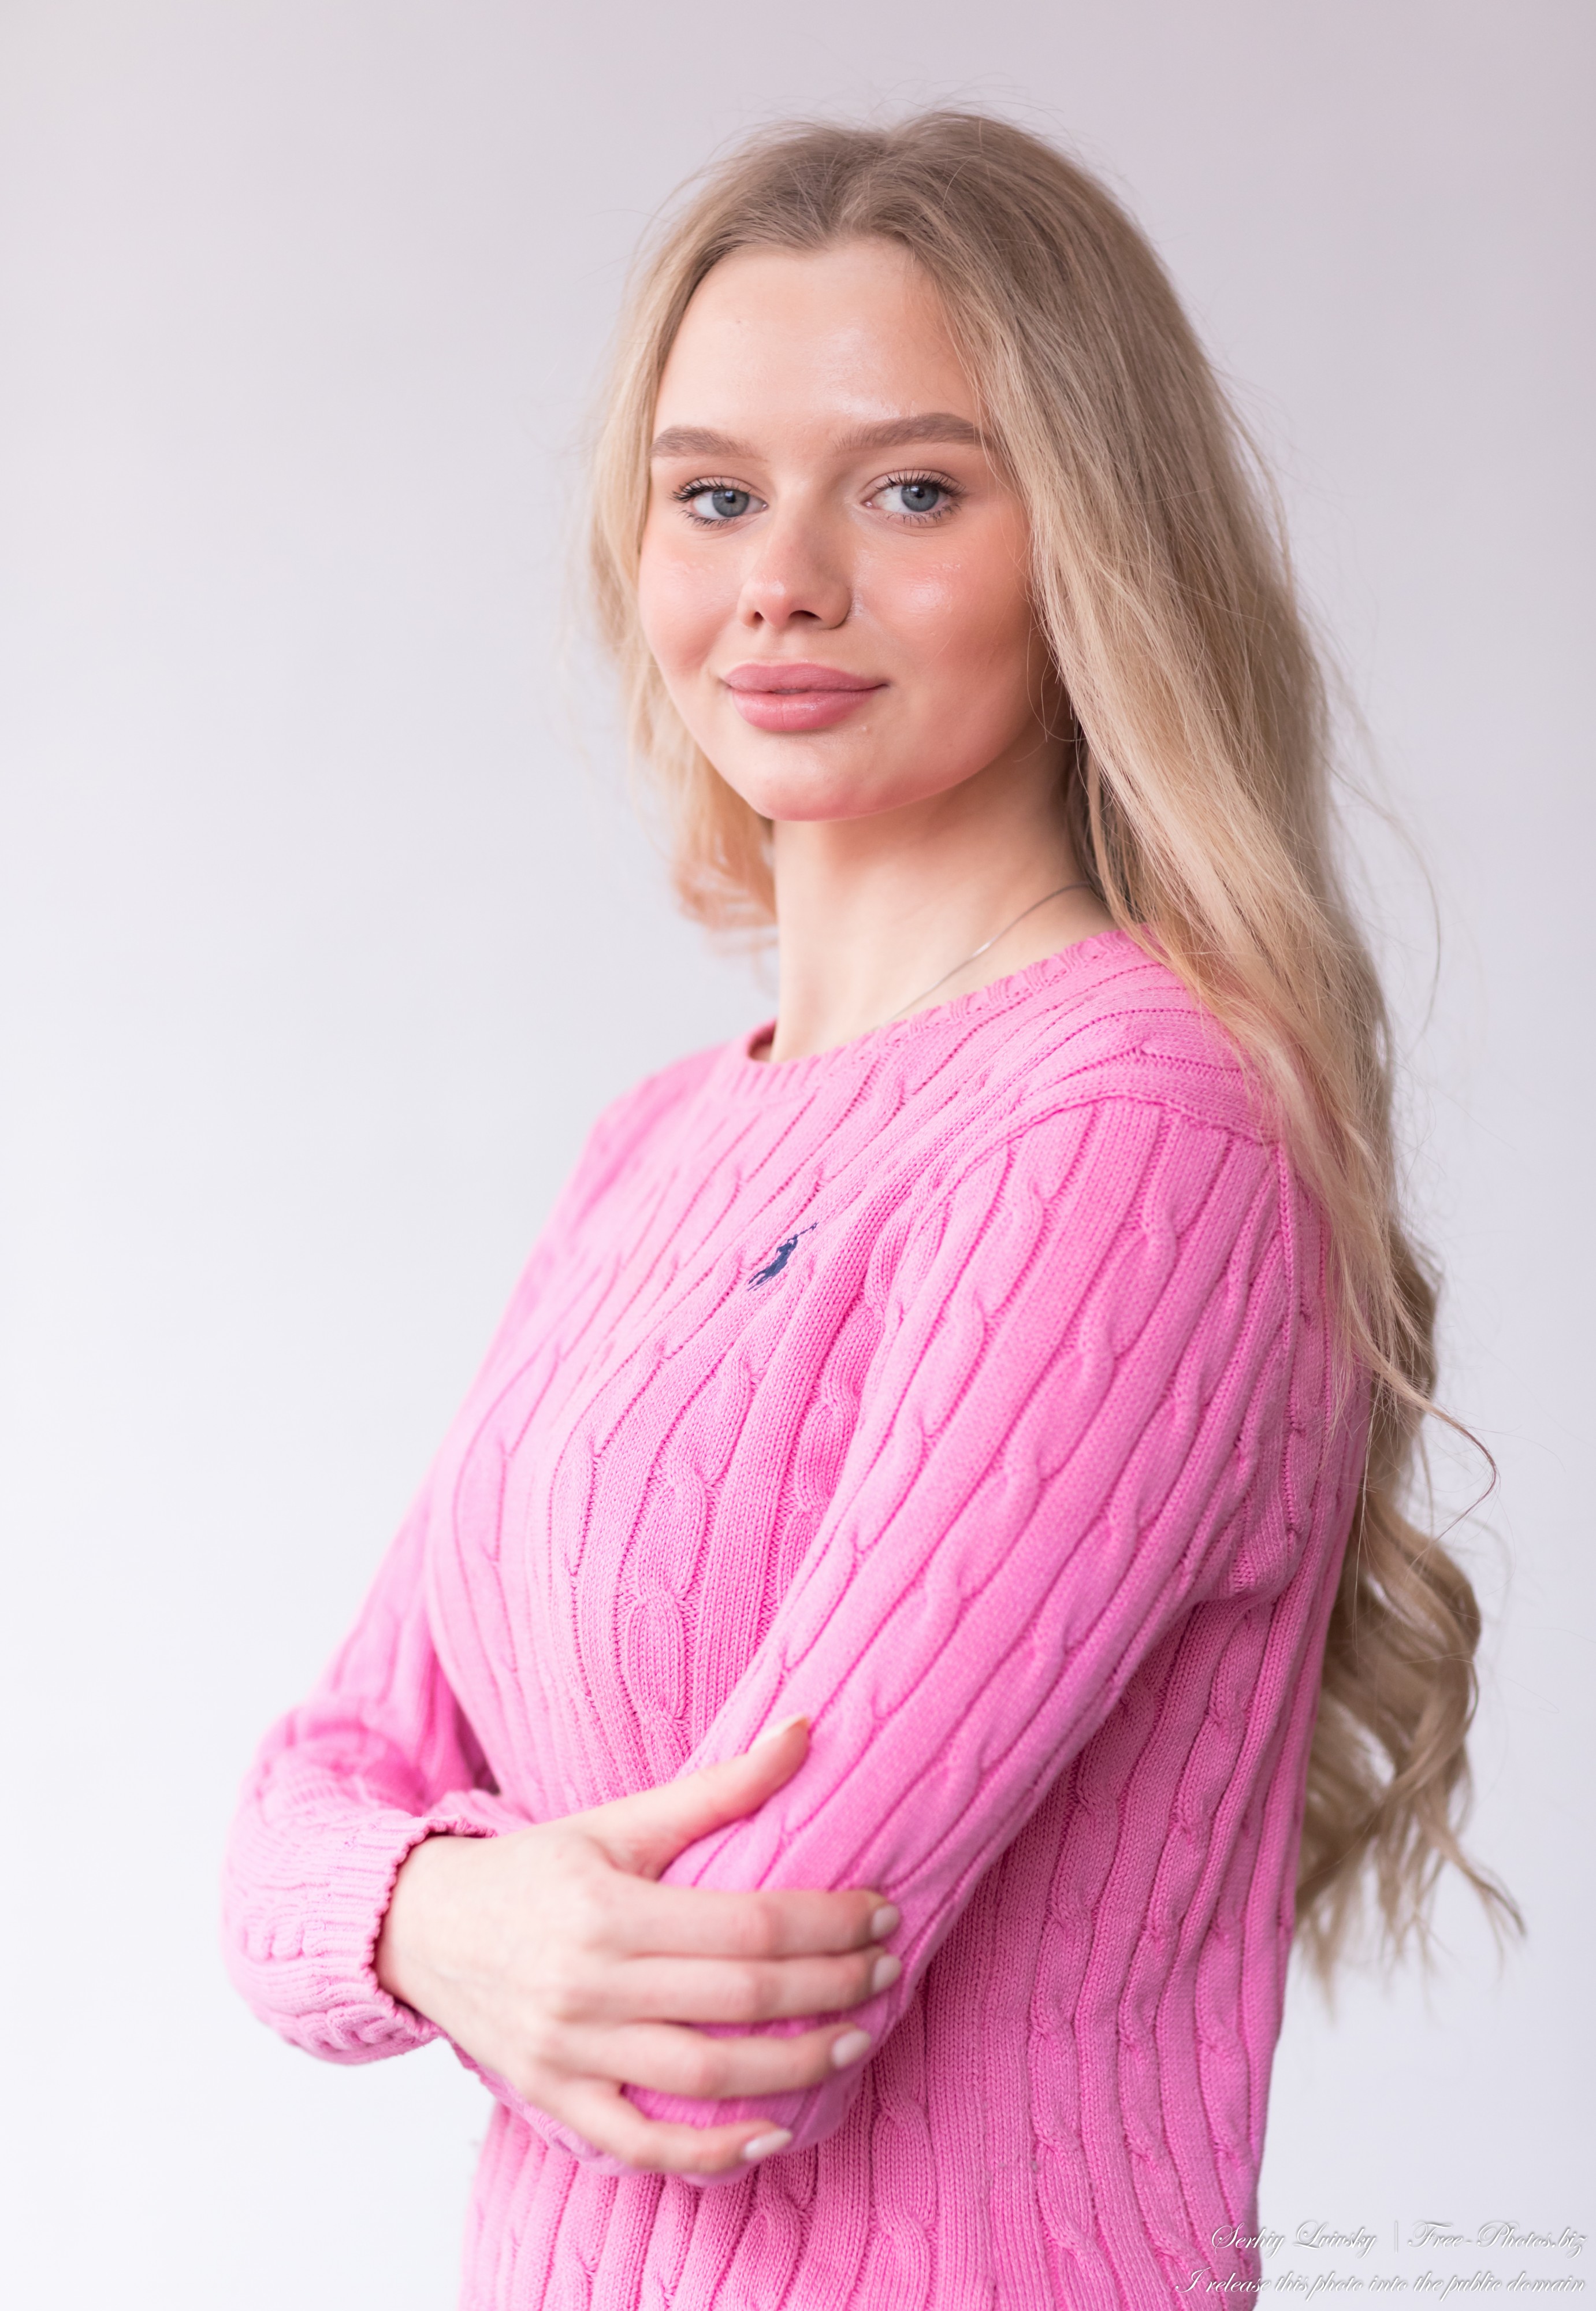 Oksana - a 19-year-old natural blonde girl photographed by Serhiy Lvivsky in March 2021, picture 1